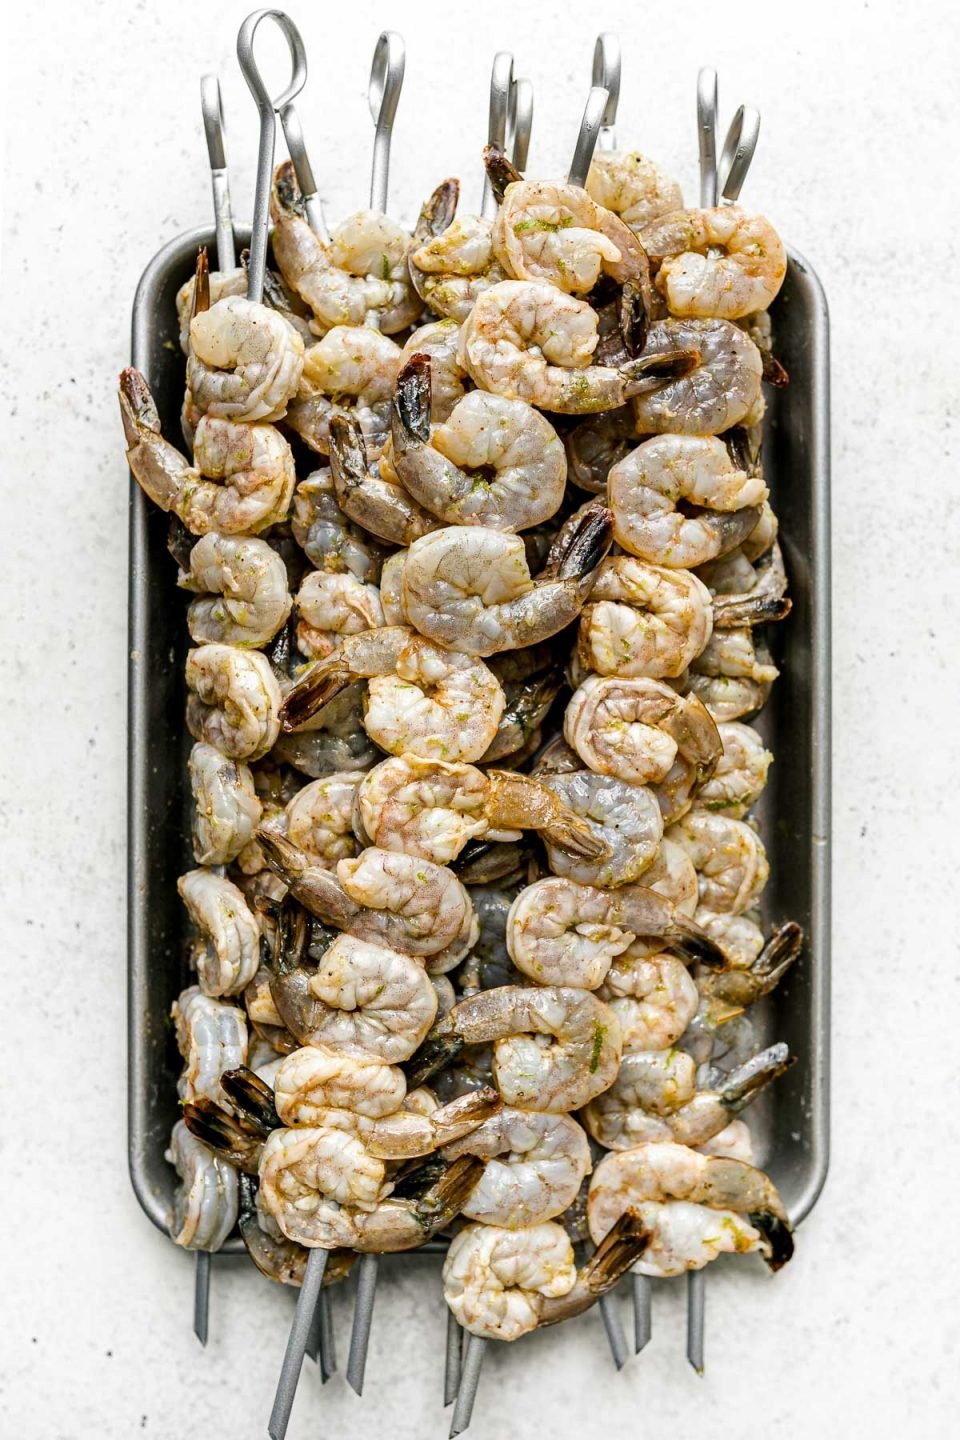 Multiple skewers of zesty marinated jumbo shrimp are stacked on top of an aluminum baking sheet. The baking sheet sits on top of a white & light gray textured surface.